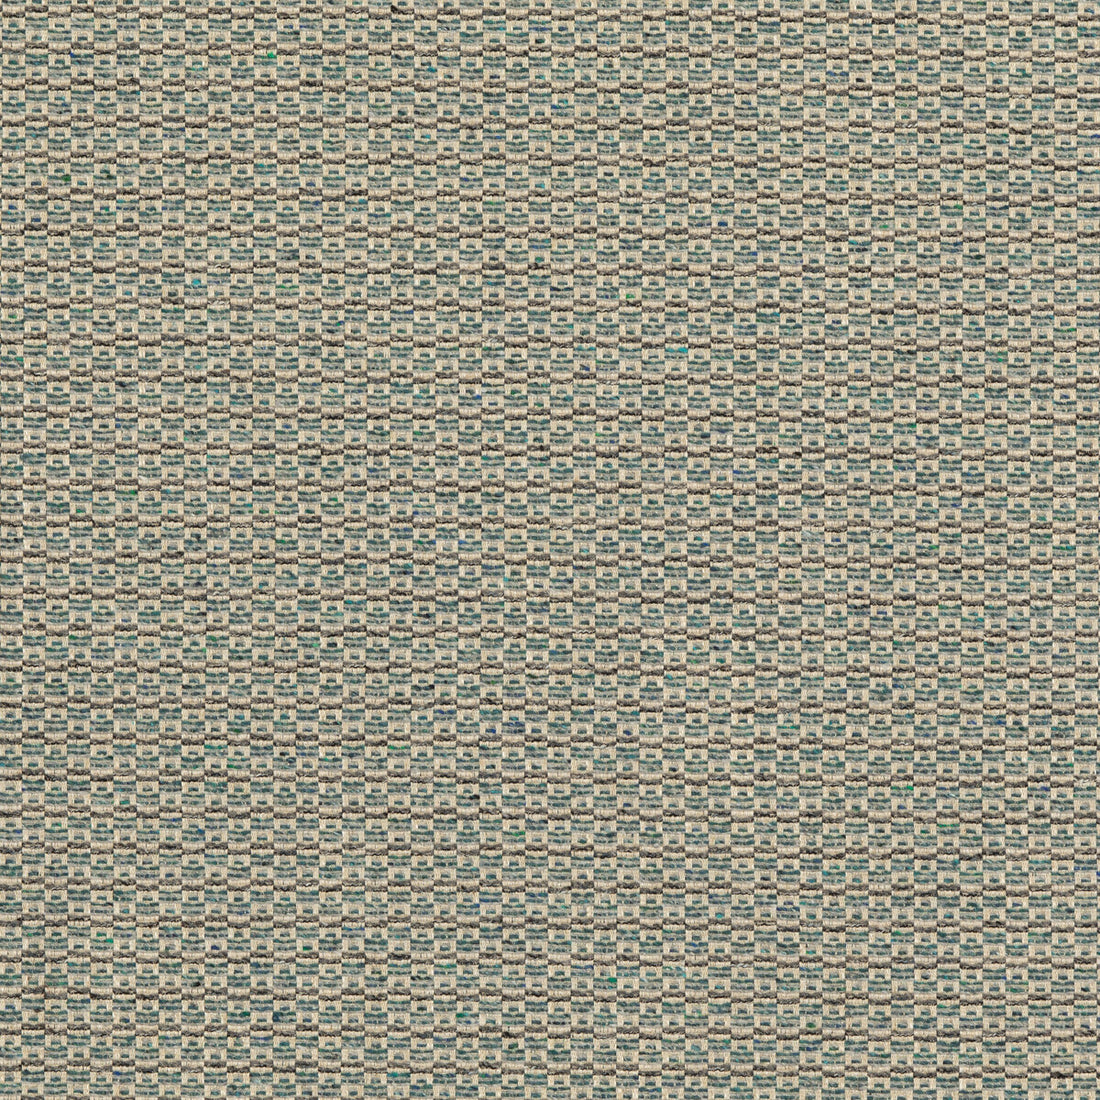 Penswood fabric in teal color - pattern BF10880.615.0 - by G P &amp; J Baker in the Essential Colours II collection